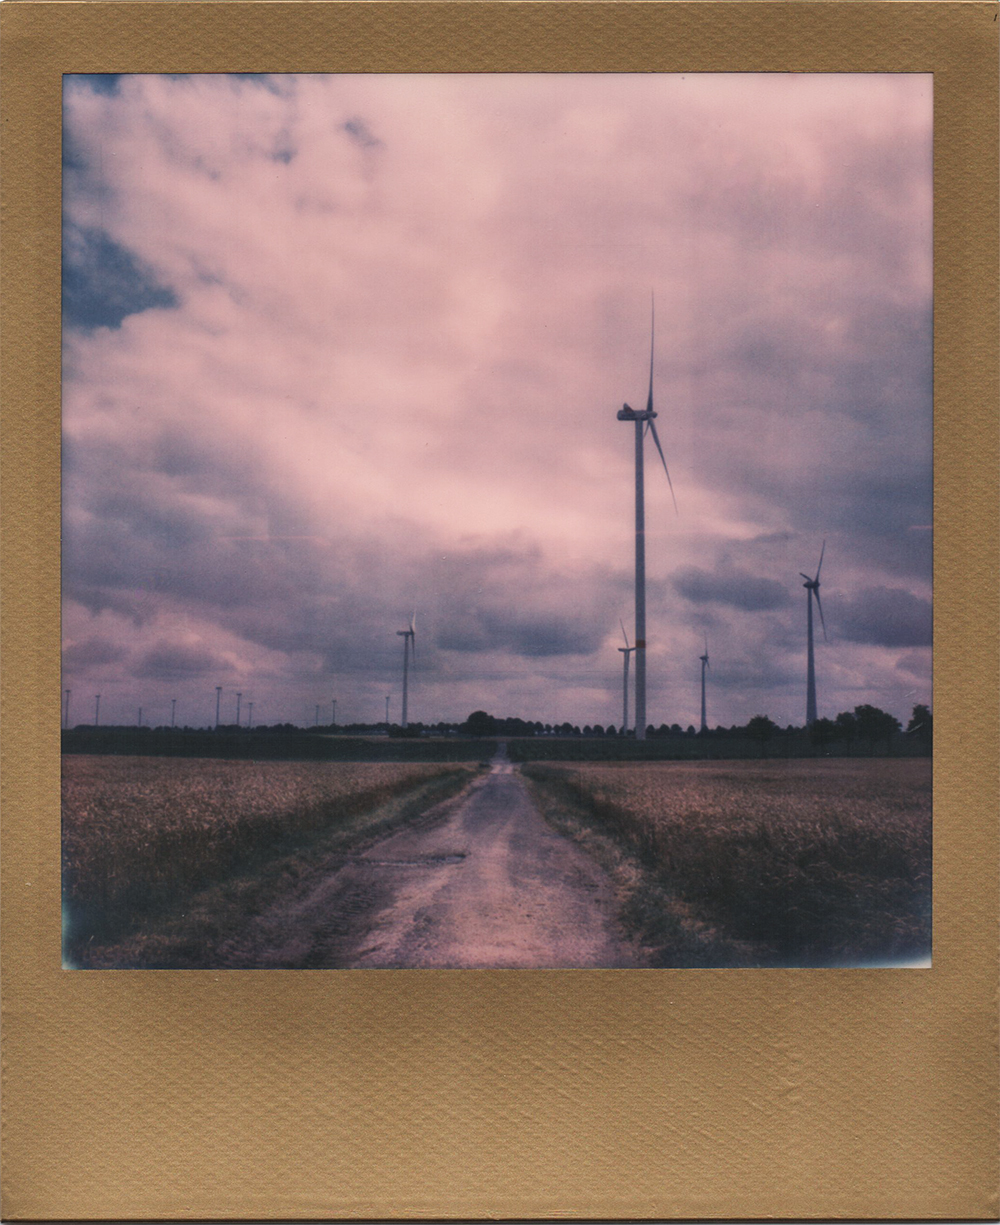 : Blowing in The Wind | SX70 | Expired Impossible Prioject Gold Frame Film | Karin Claus